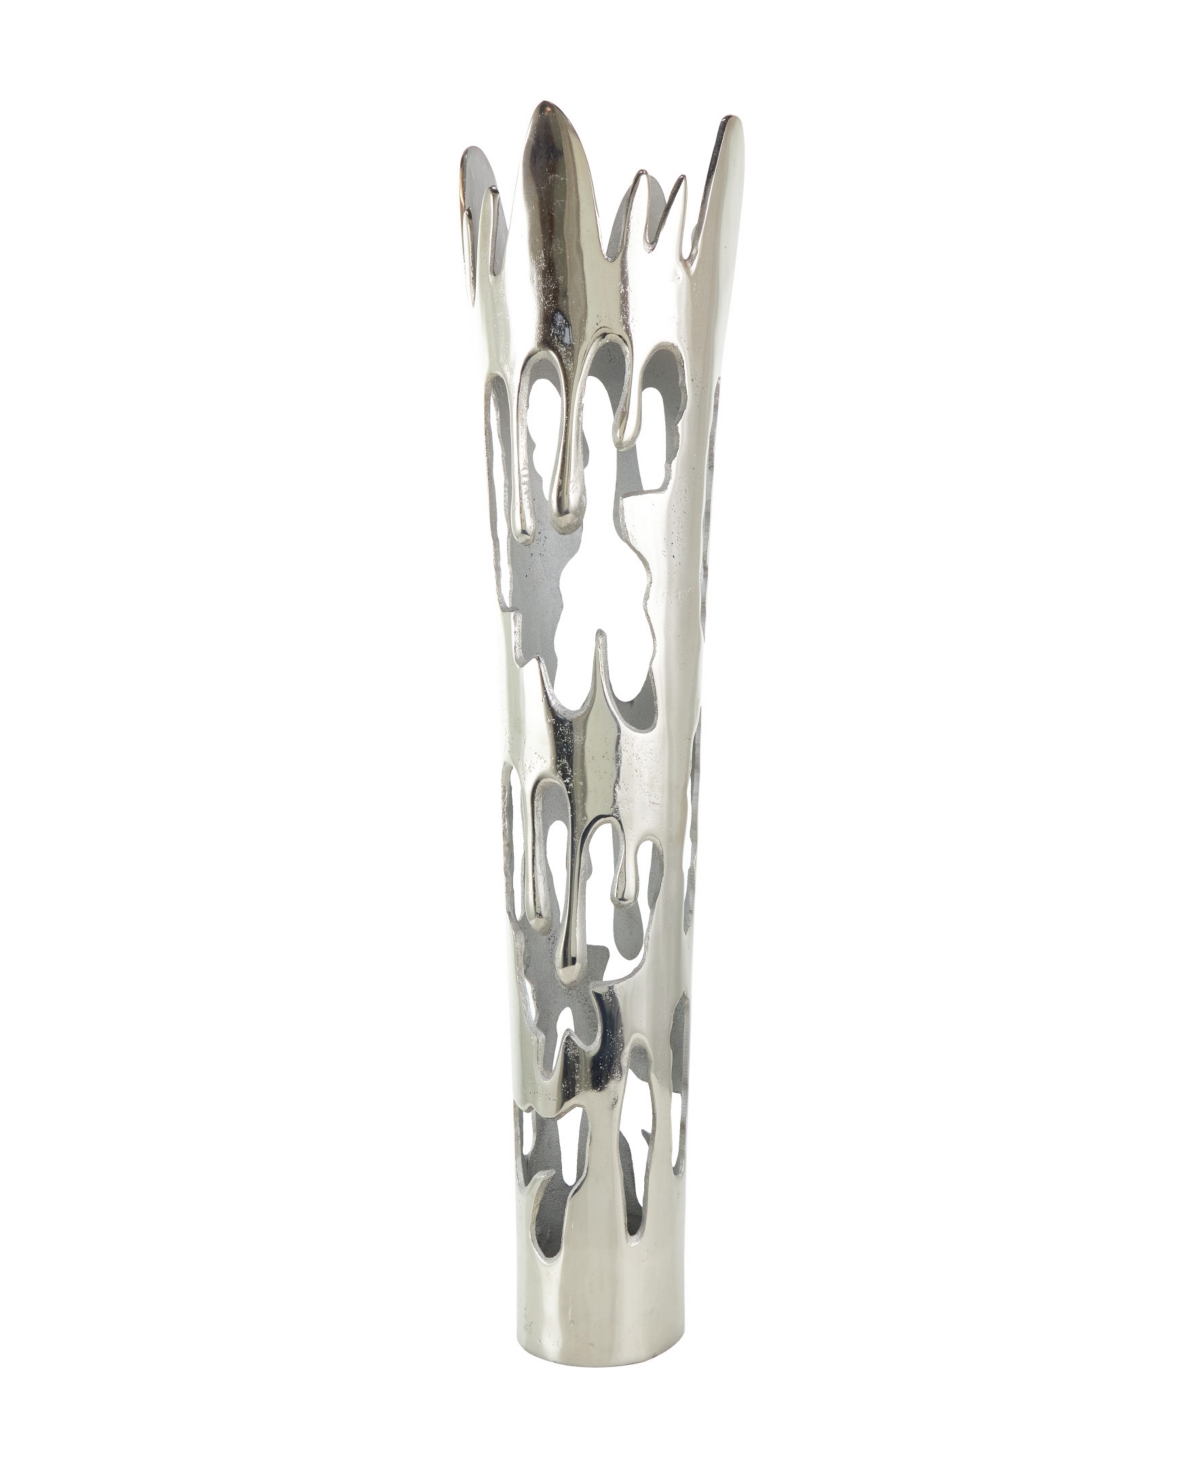 Rosemary Lane Aluminum Drip Vase With Melting Designed Body, 9" X 8" X 31" In Silver